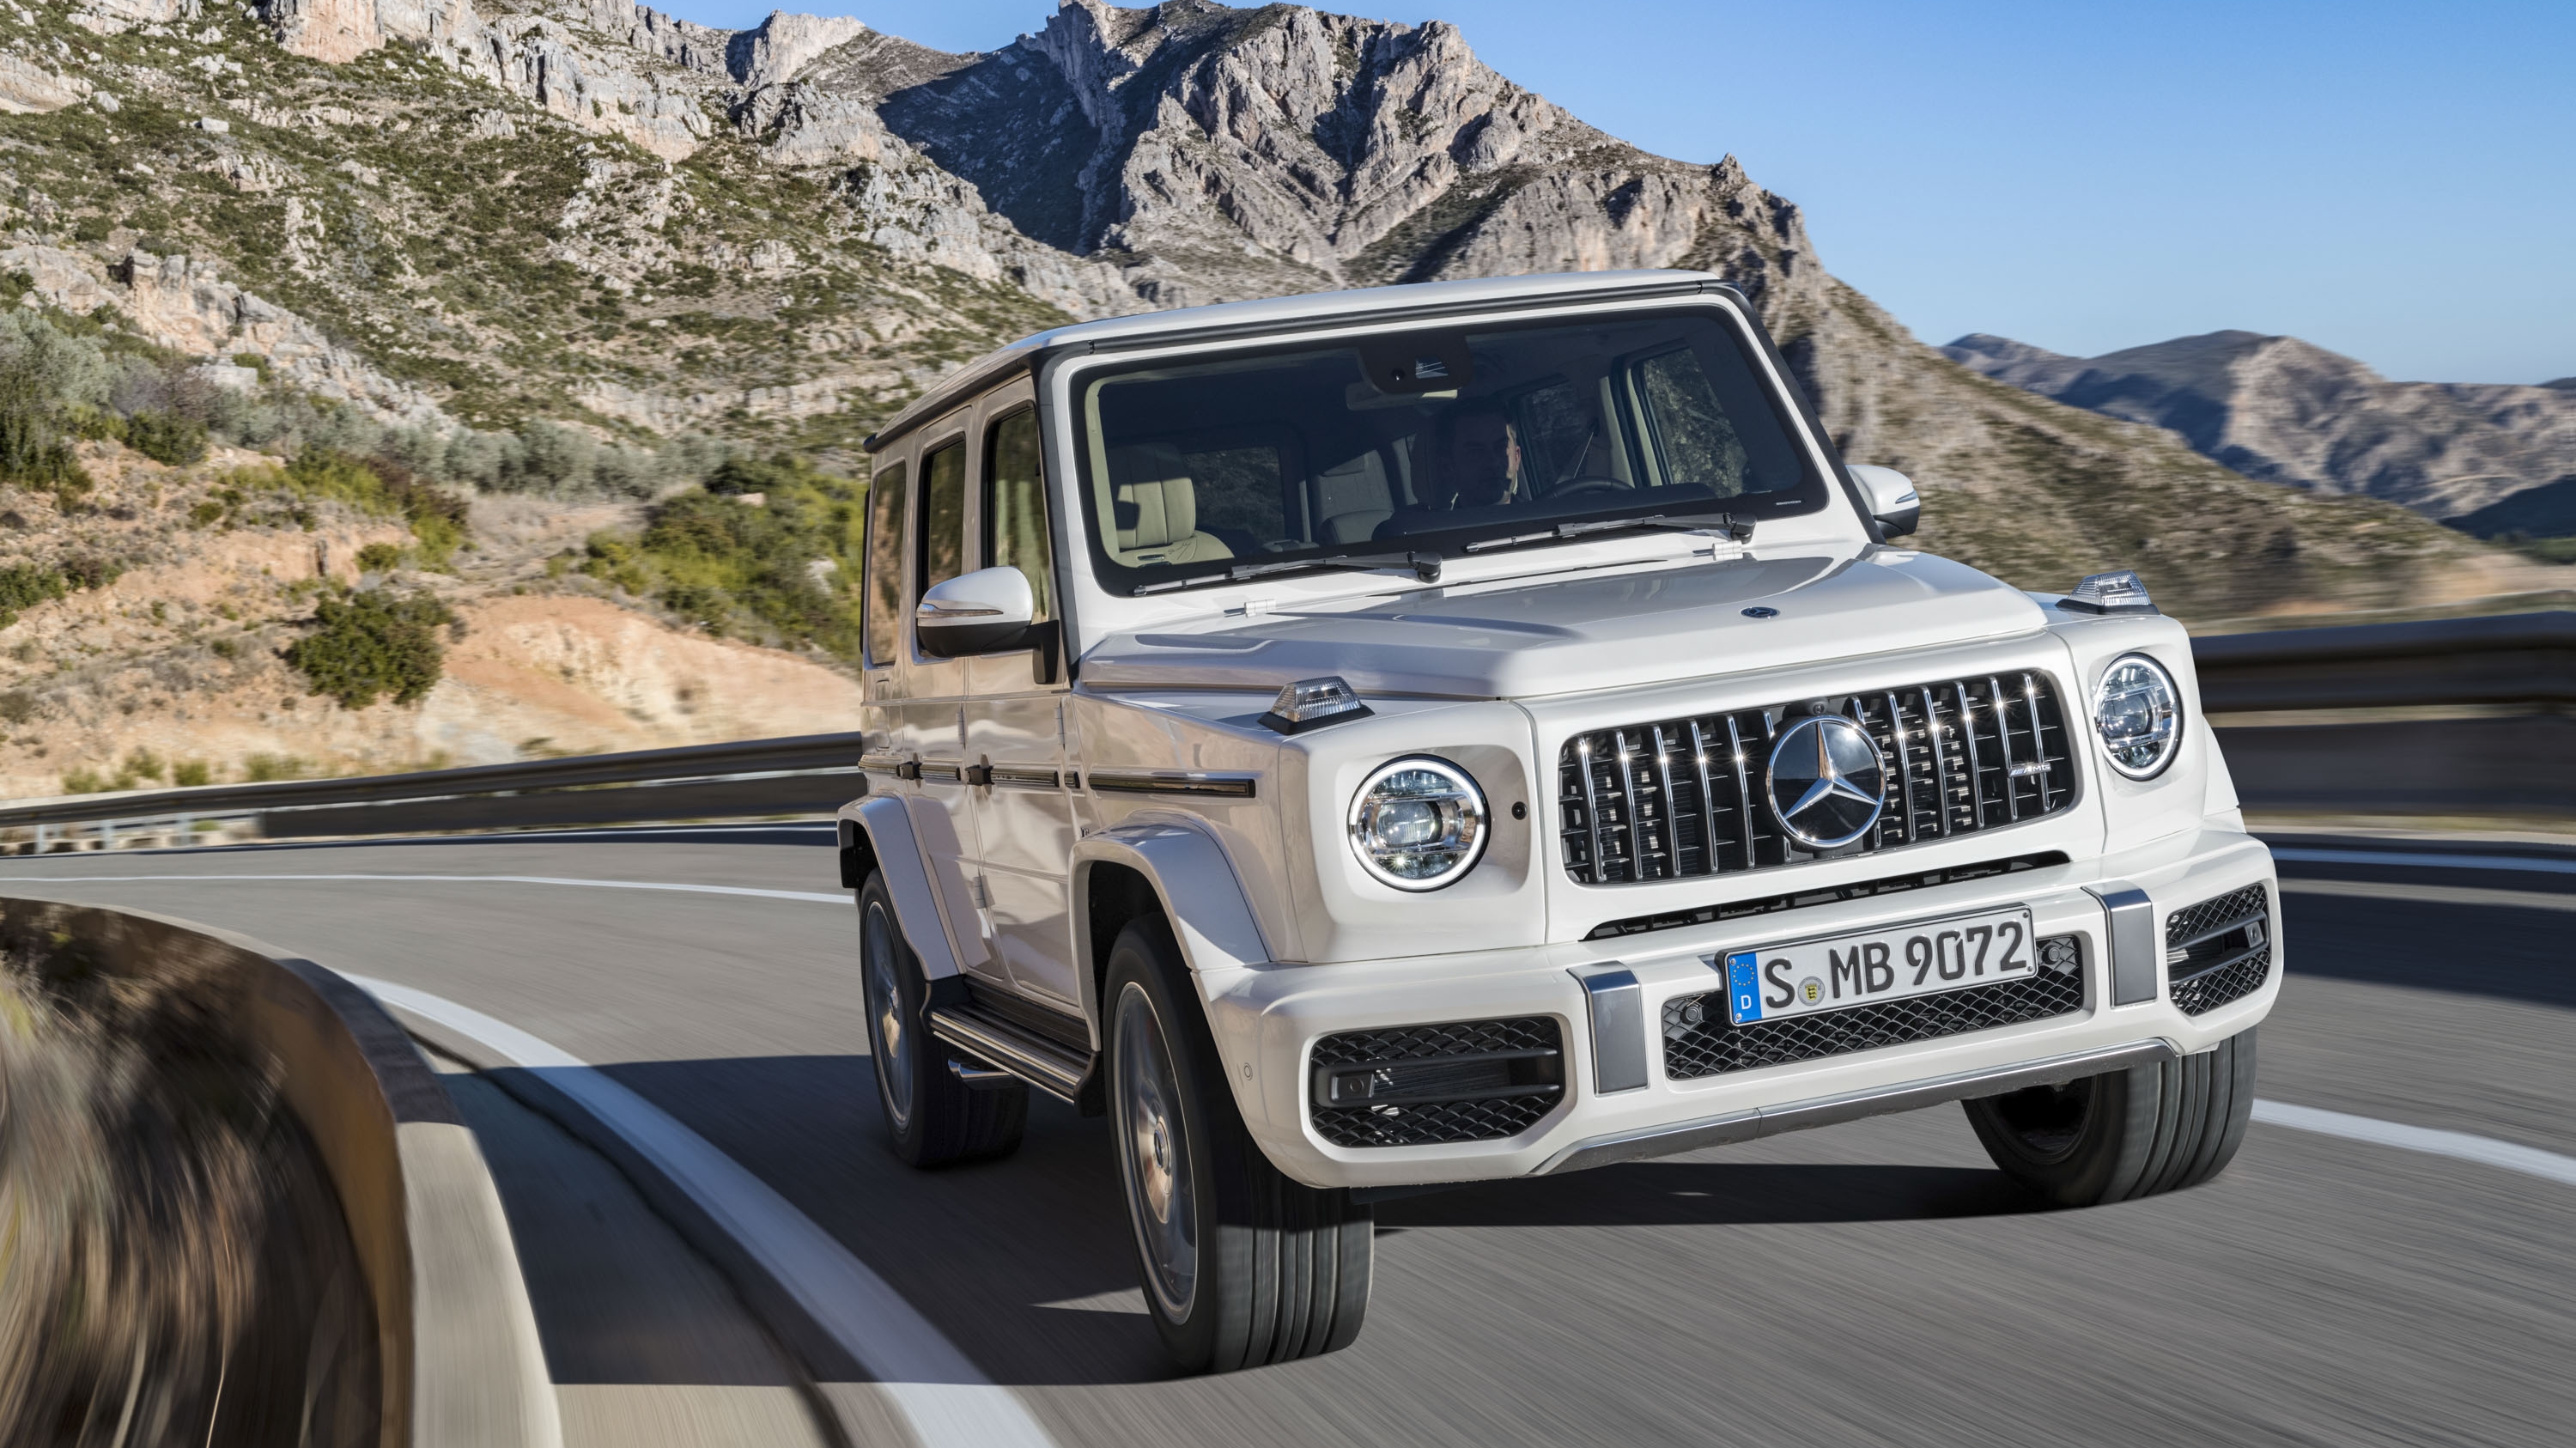 2018 Mercedes-amg G63 Pictures, Photos, Wallpapers - 2019 Mercedes G Class Amg , HD Wallpaper & Backgrounds